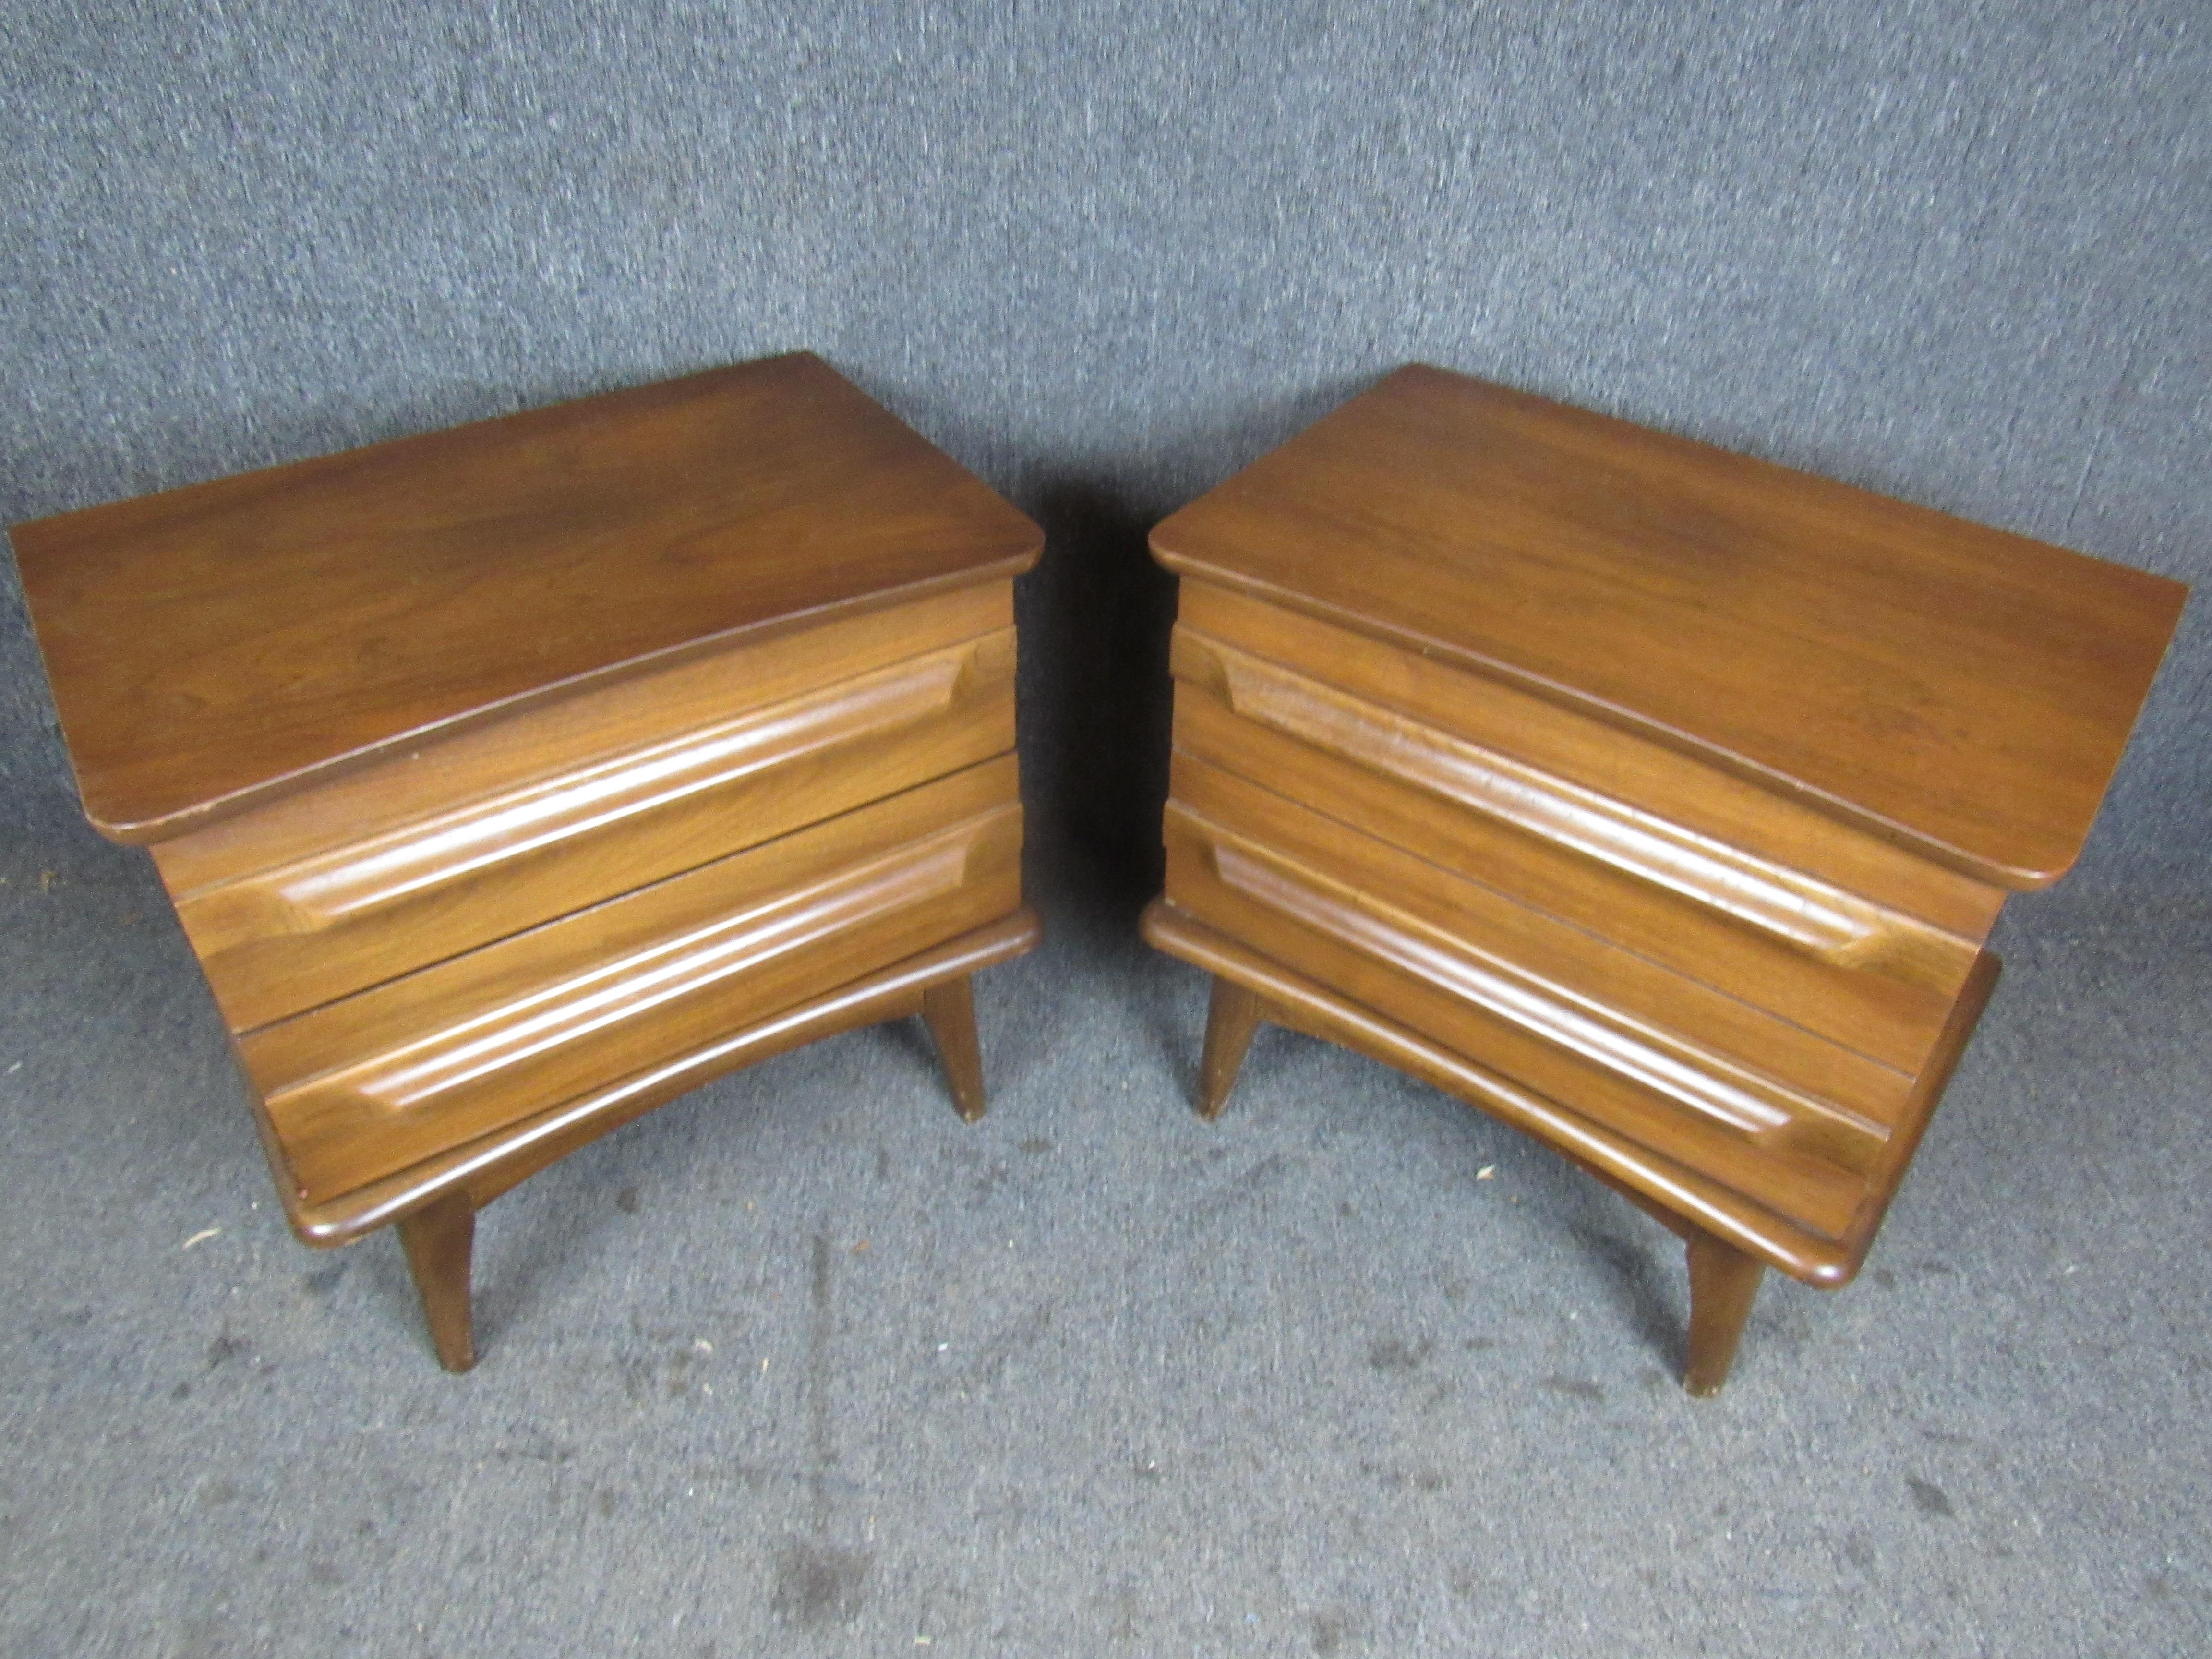 Pair Mid-Century Modern nightstands. These nightstands offer a Classic mid century design given the drawer pull that extends across the face of the nightstands. These nightstands are a perfect combination of beauty and functionality fit for any